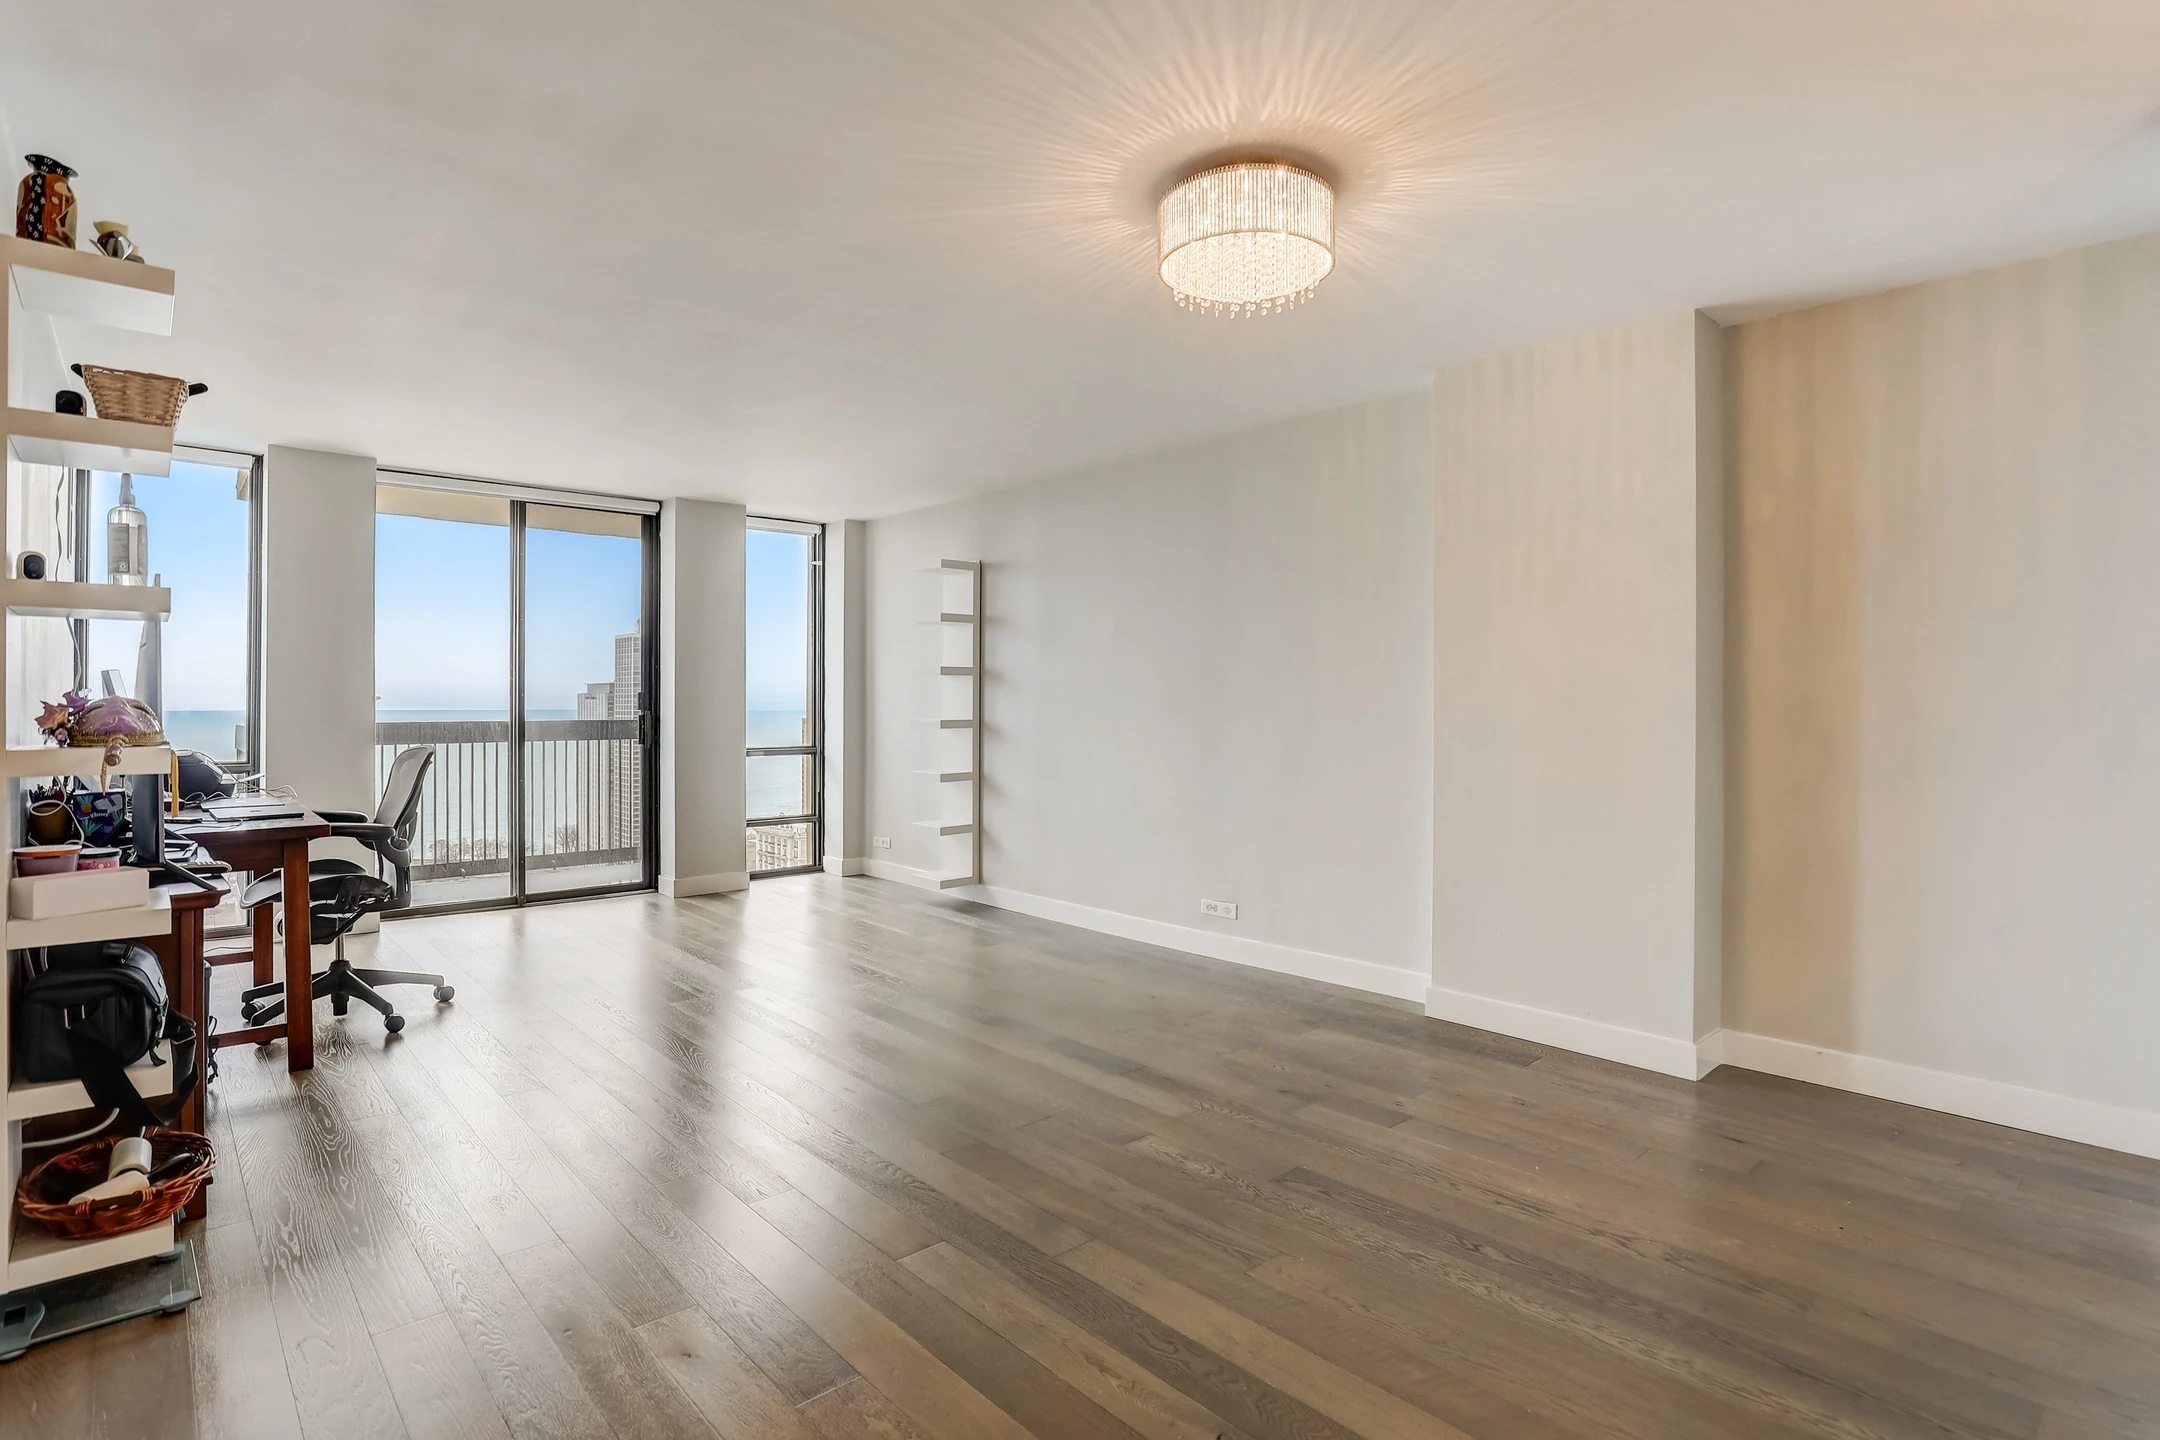 Chic Urban Living in Old Town - Renovated 1 Bed Condo with Lake Views!